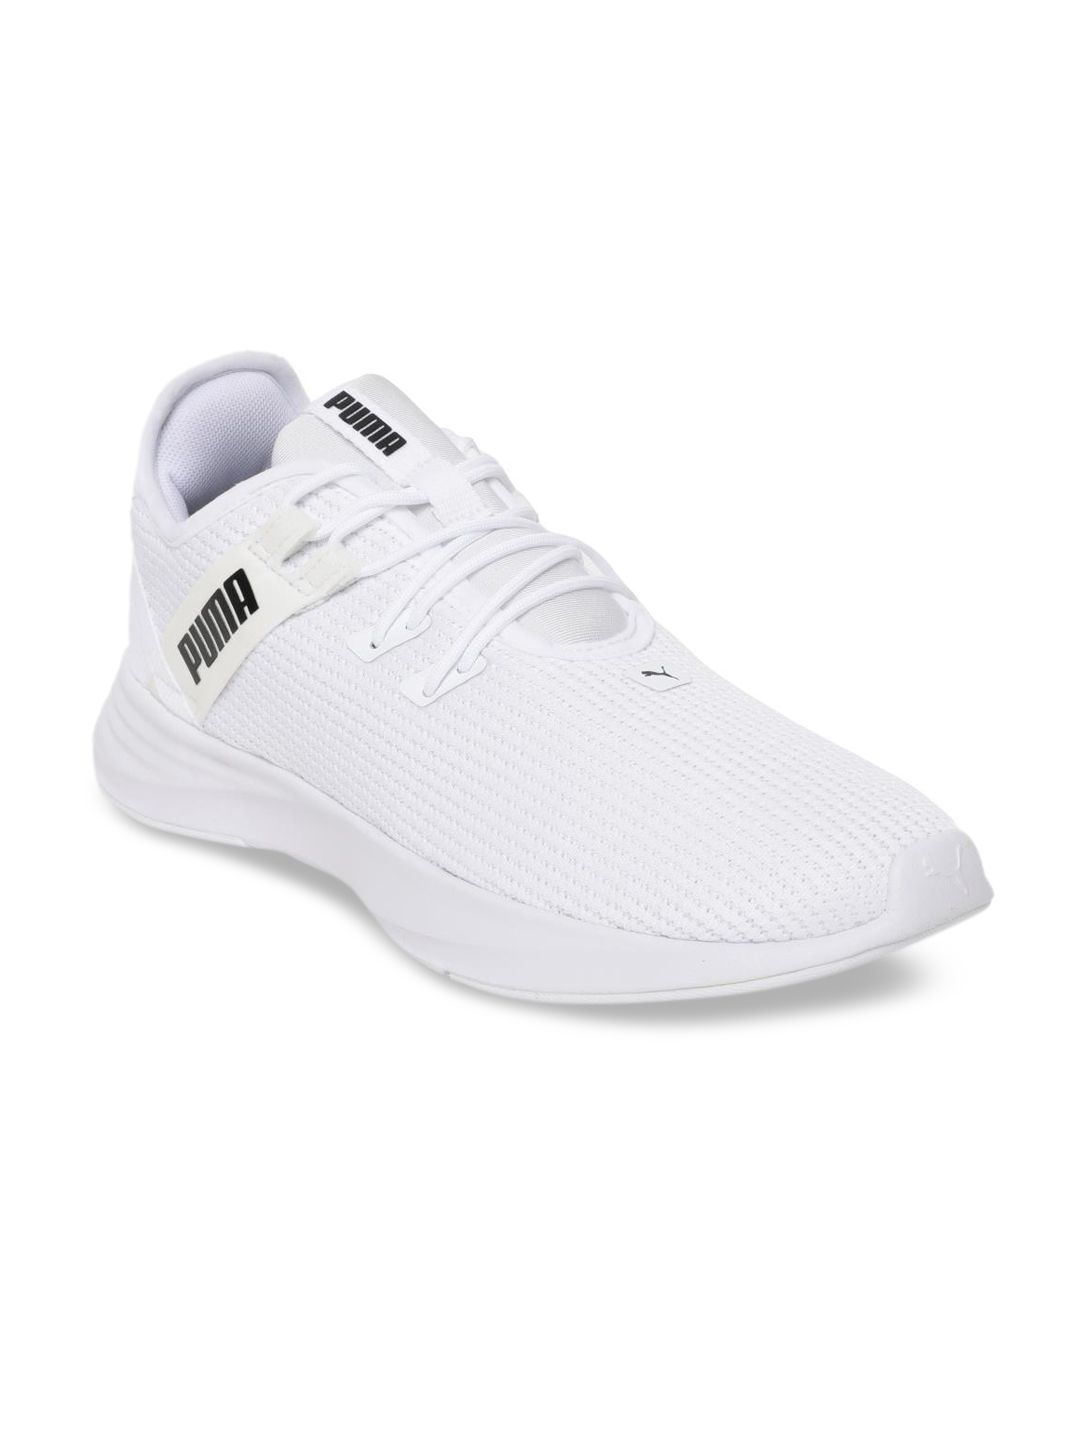 Puma Women White Radiate XT Mid-Top Training or Gym Shoes Price in India